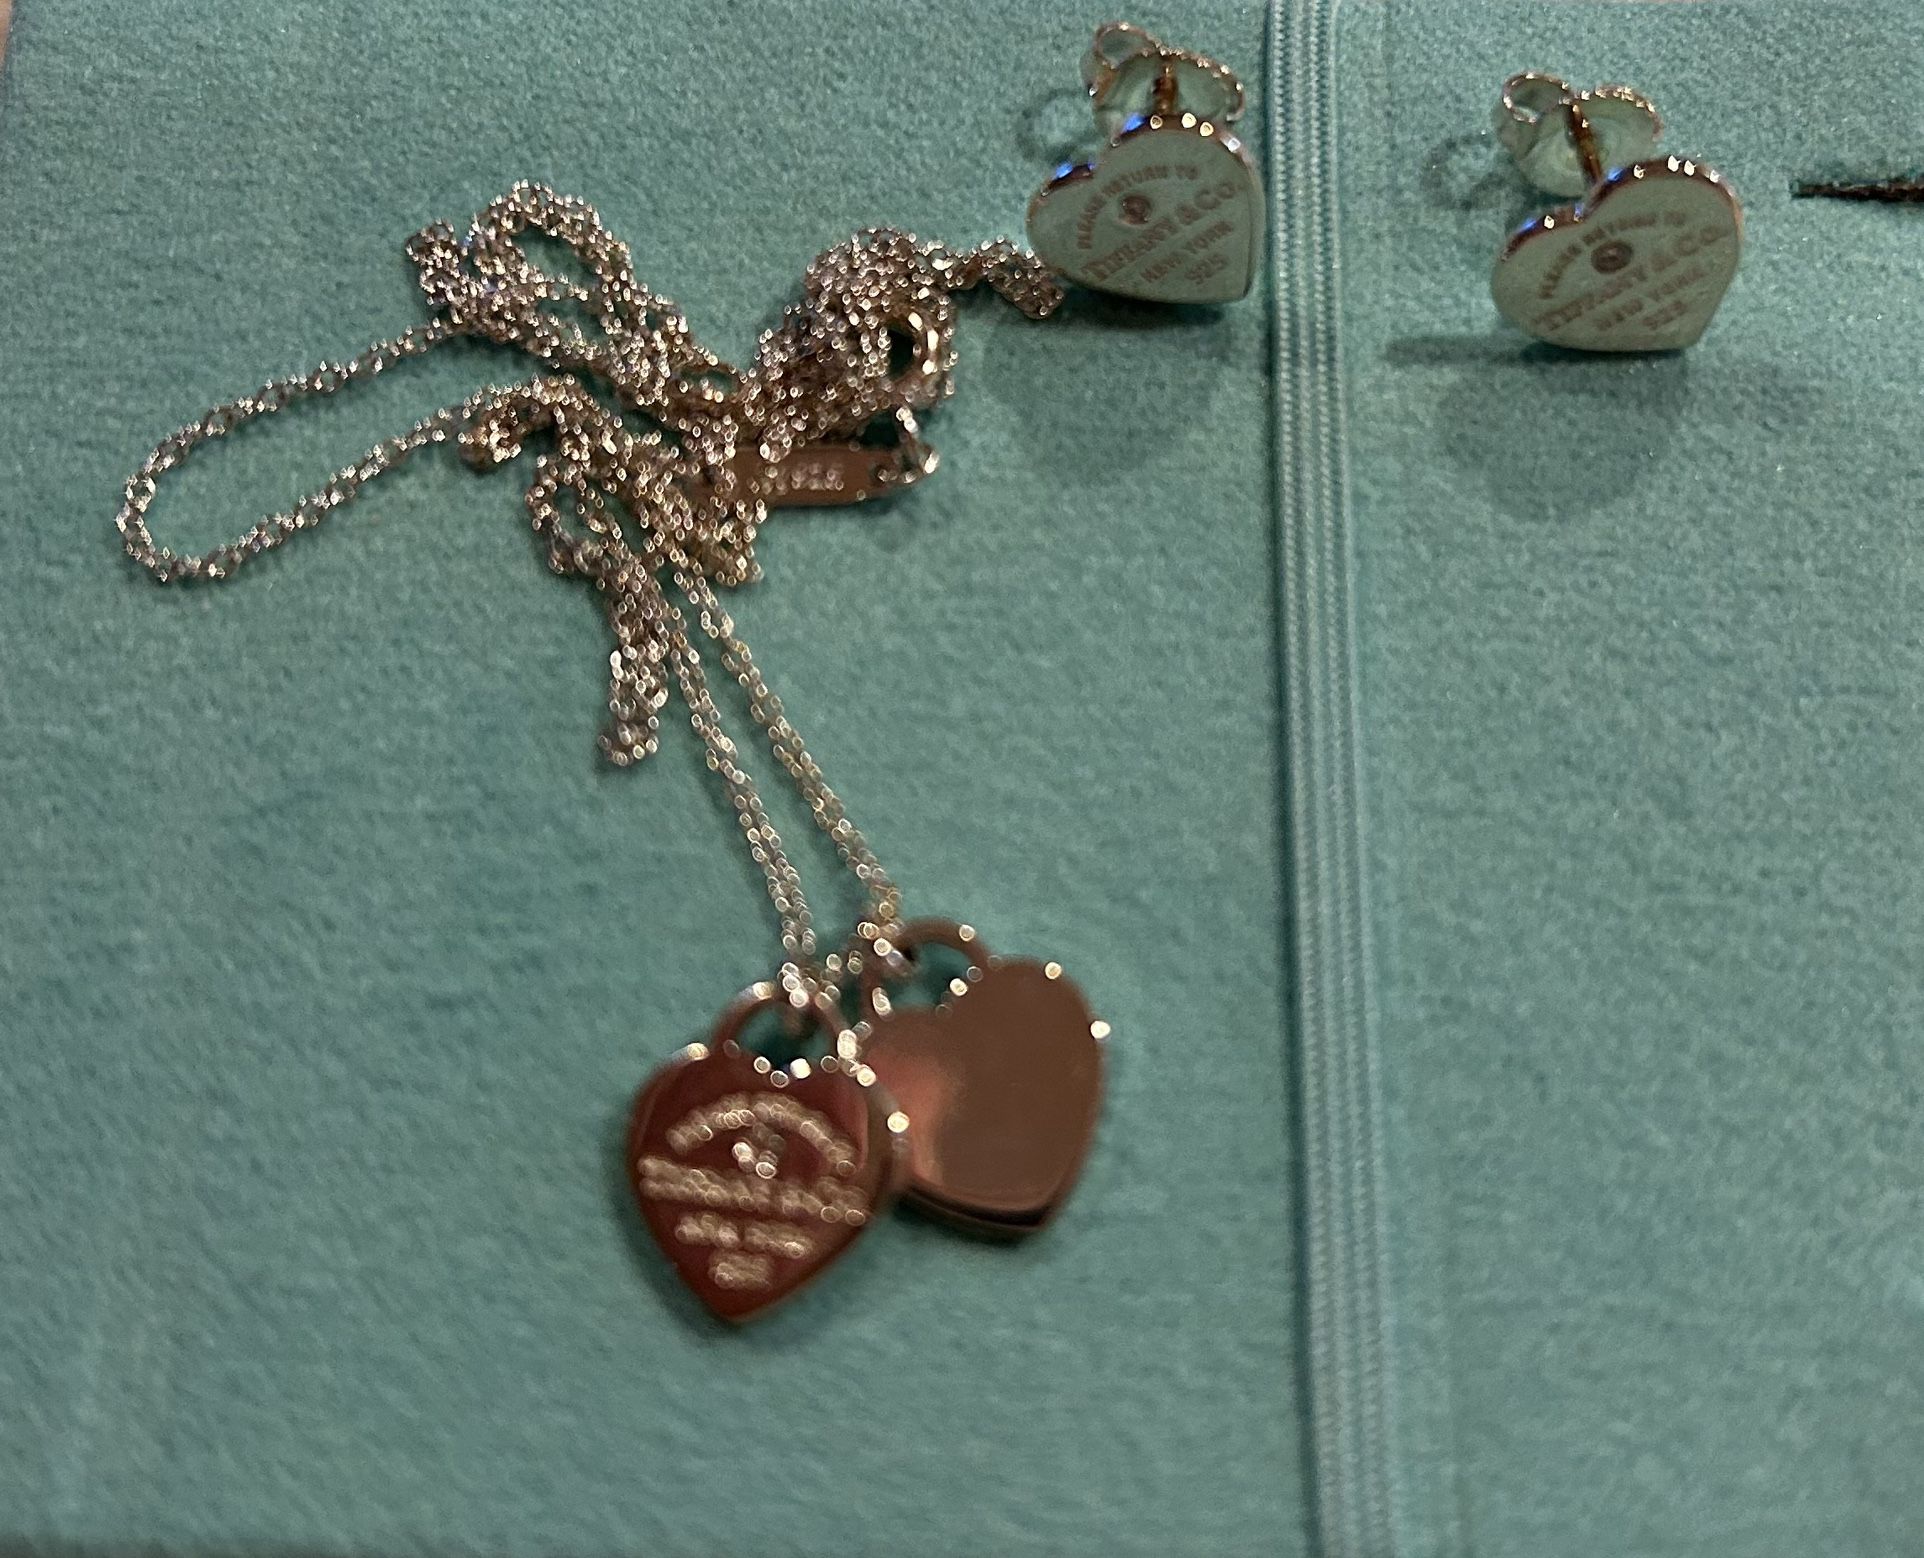 DOUBKE HEART TAG PENDANT in Silver Mini Necklace And Earrings